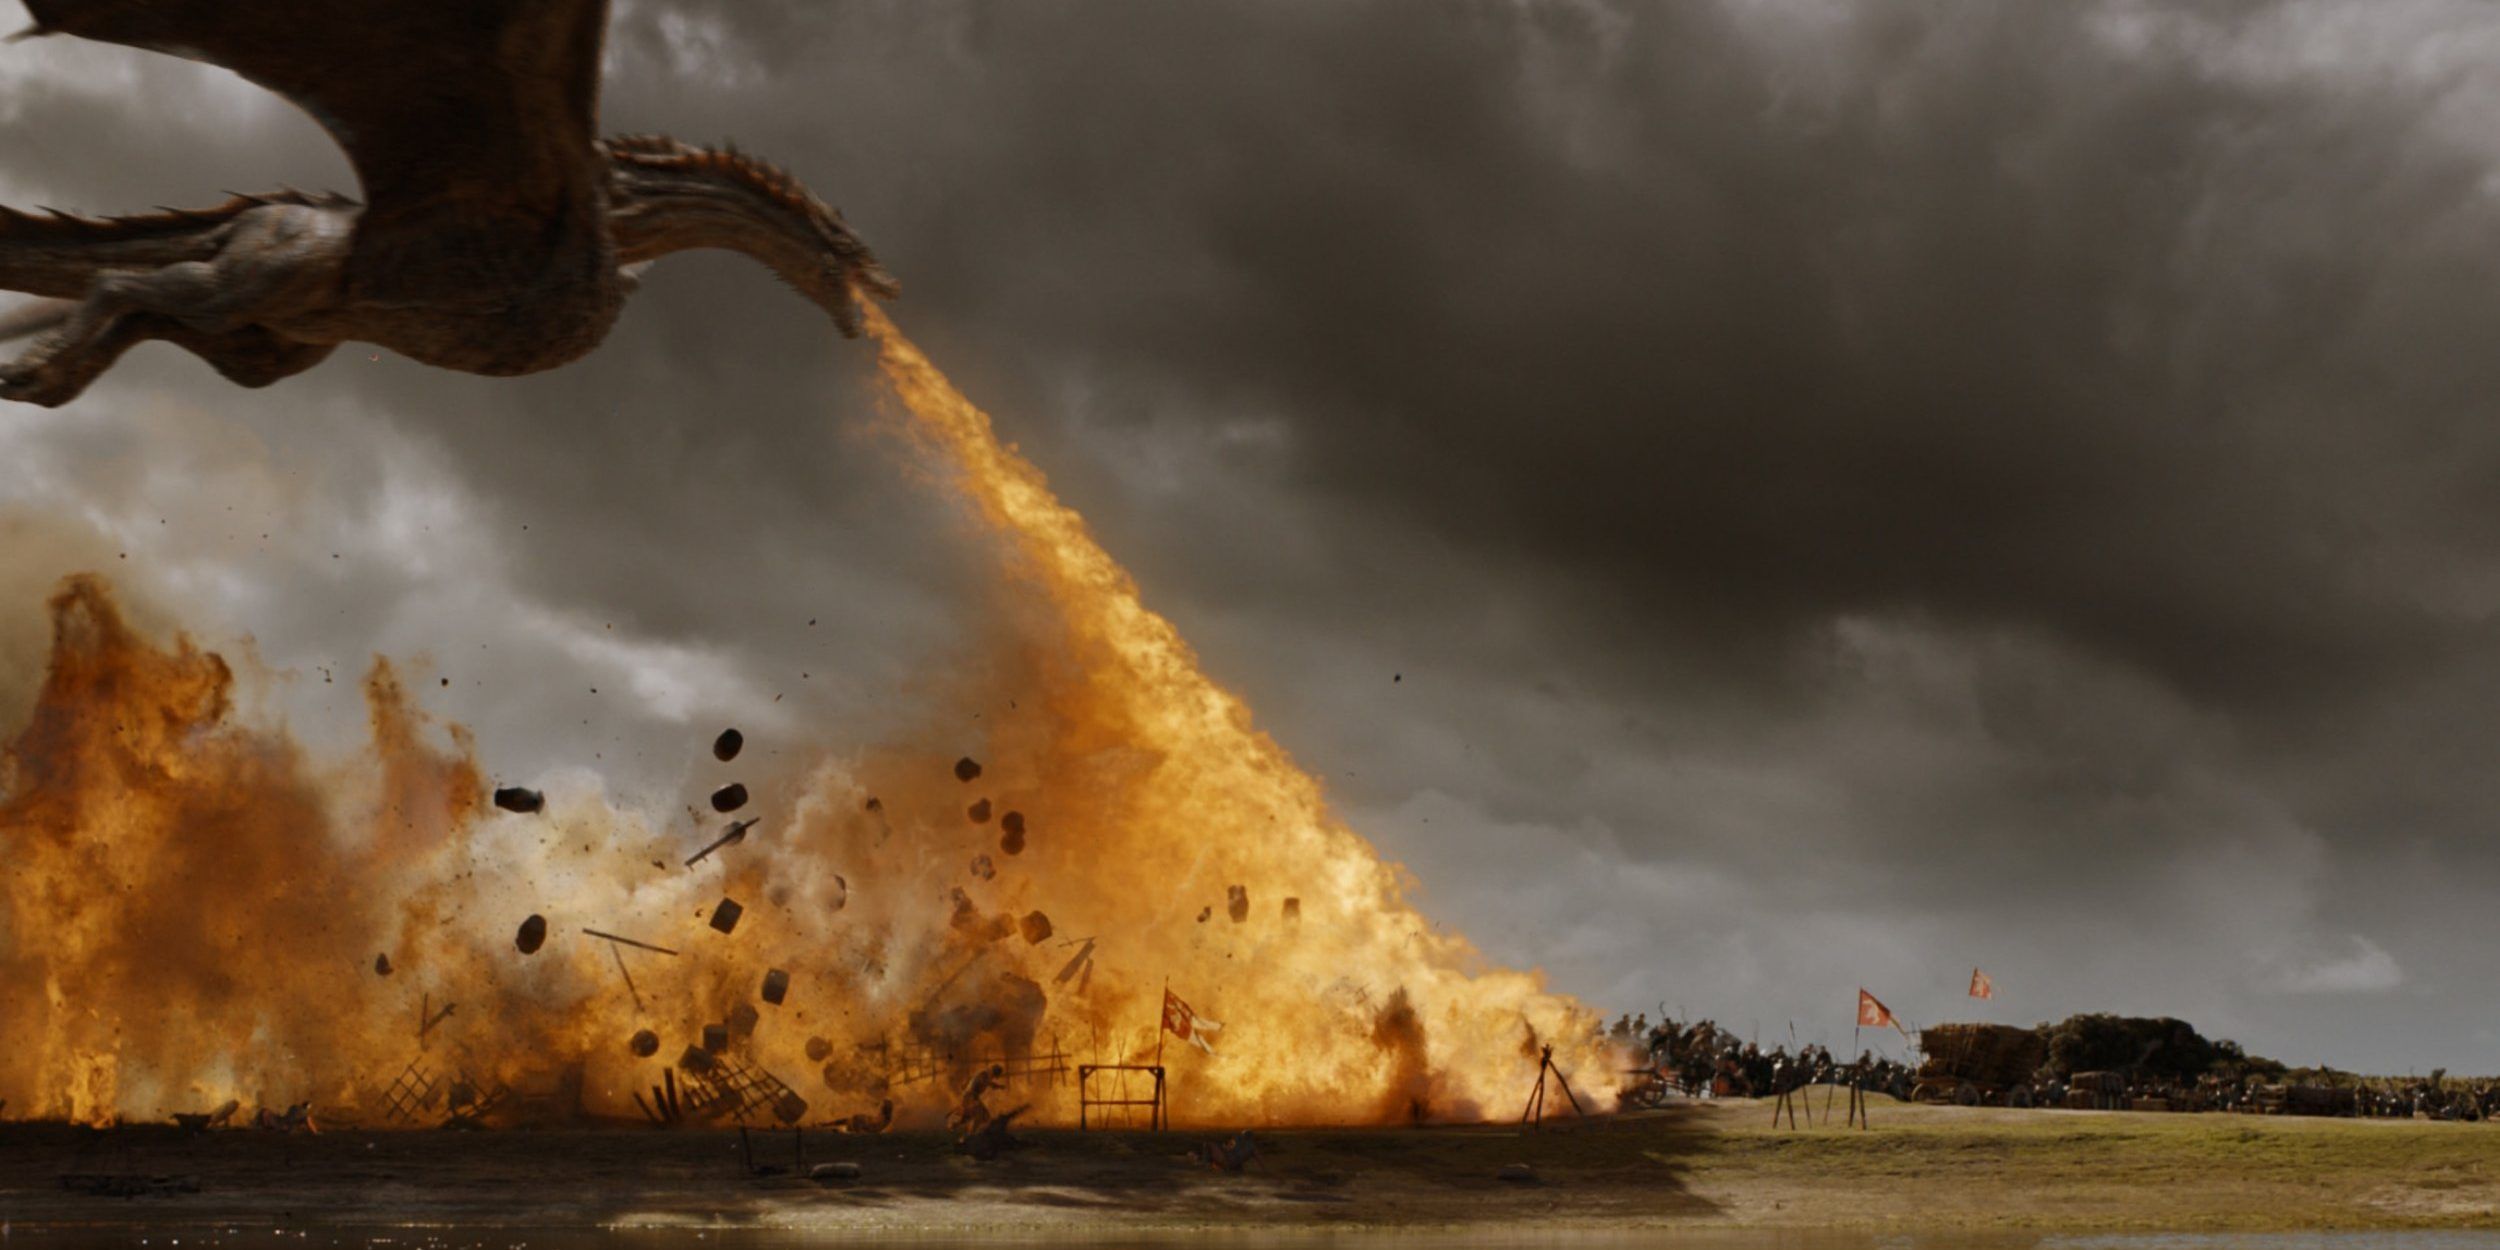 Drogon breathes fire on the Lannister forces in Game of Thrones